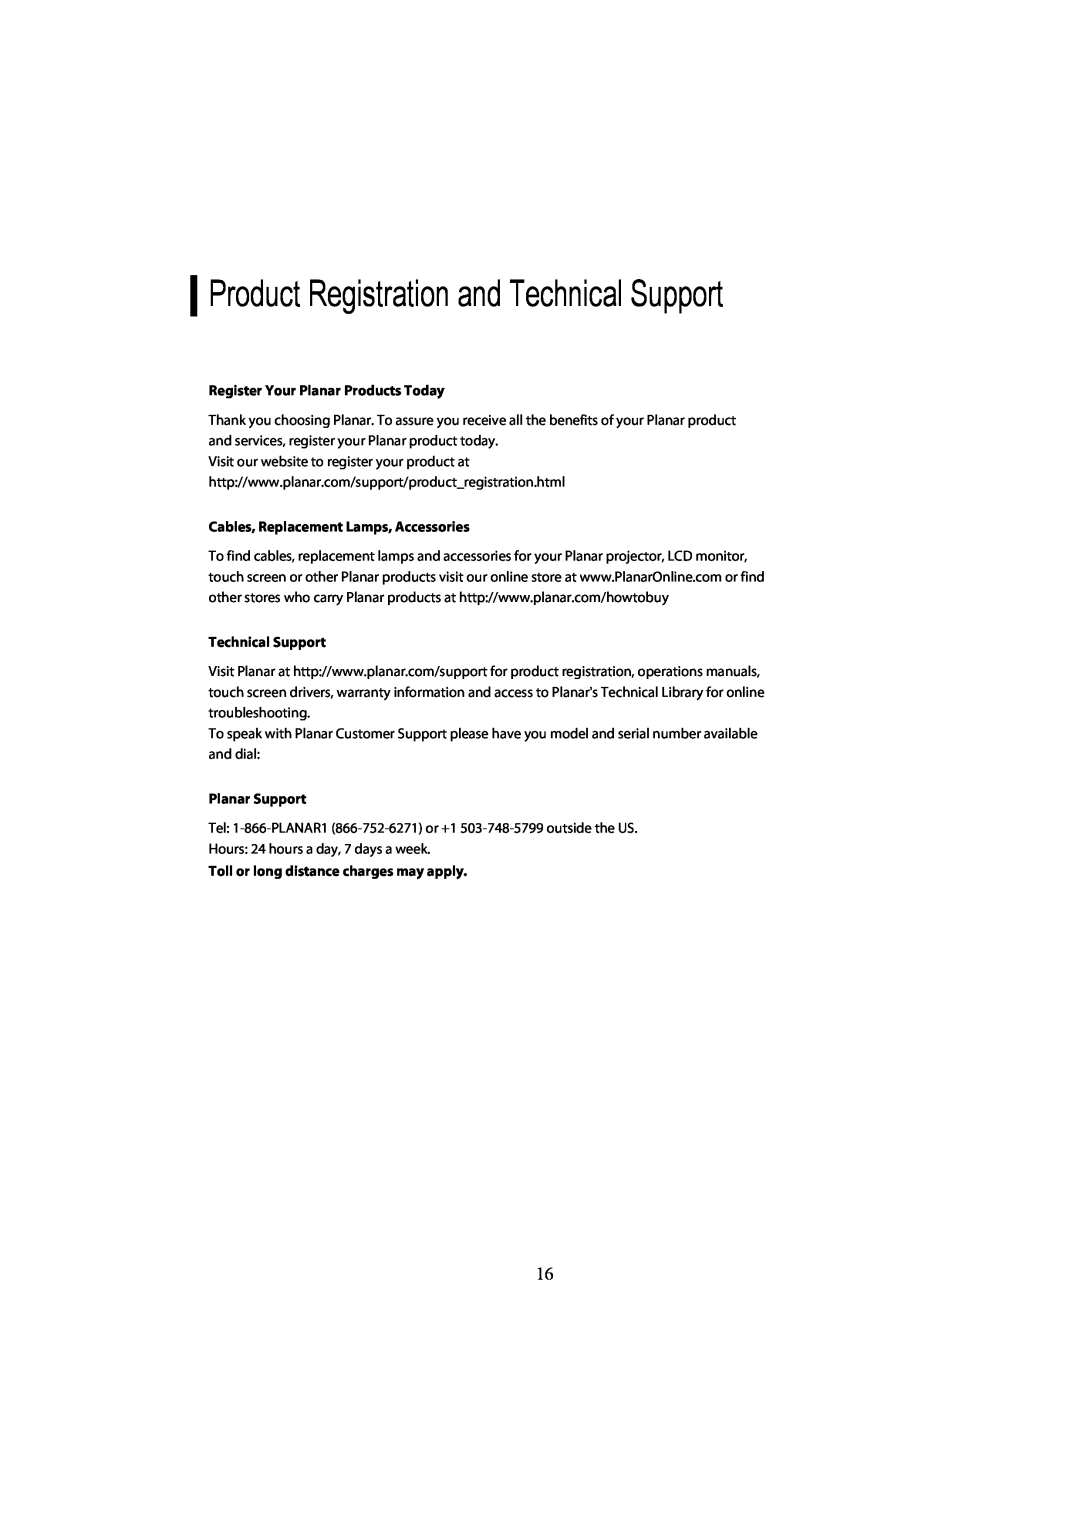 Planar PL2010MW manual Product Registration and Technical Support, Register Your Planar Products Today, Planar Support 